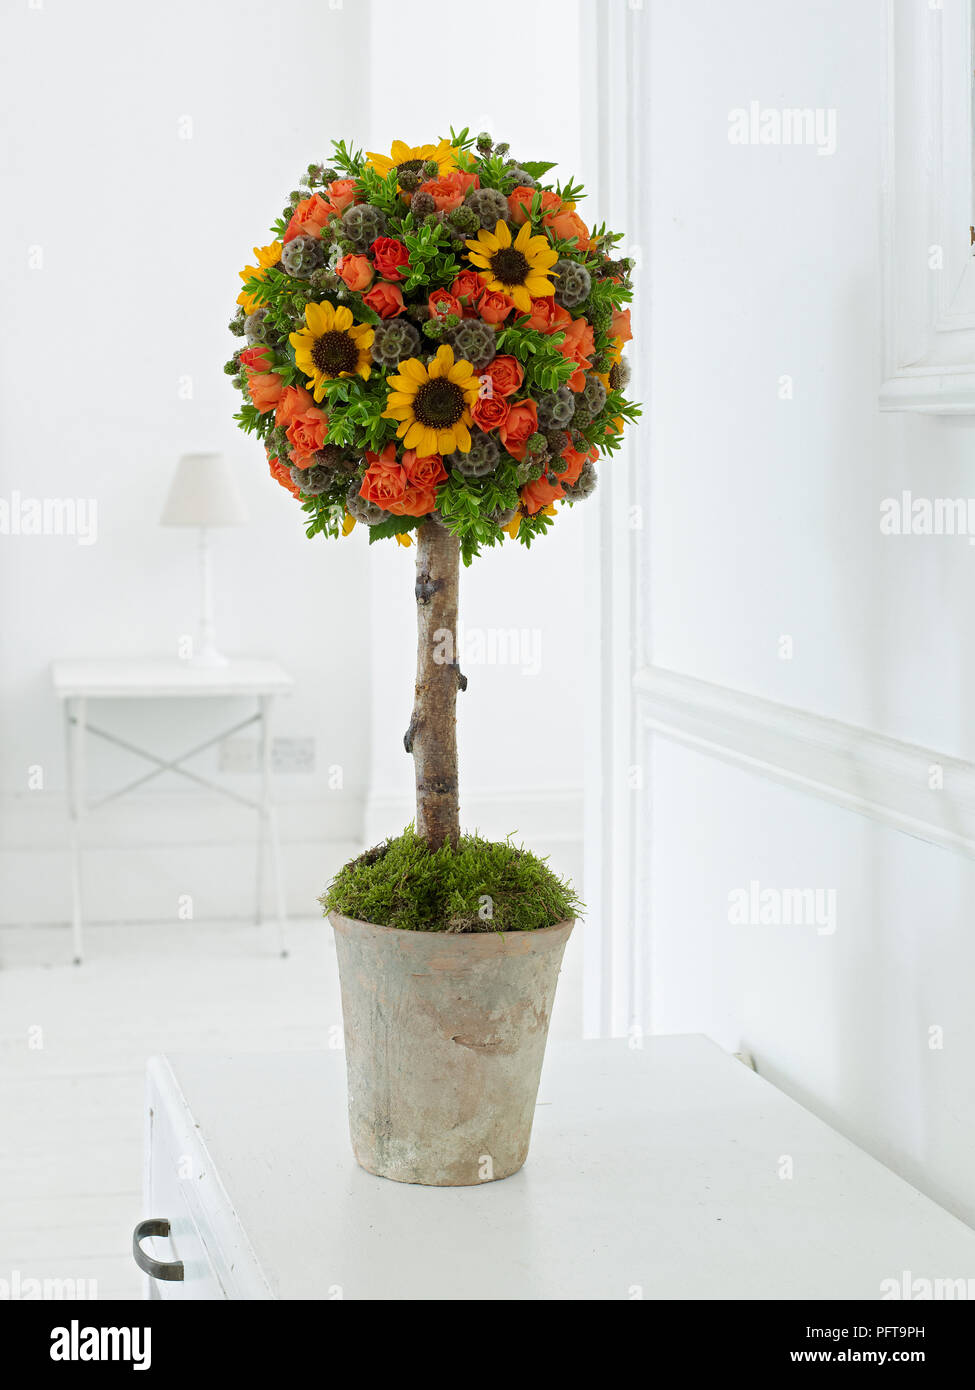 Topiary tree, using scabious, hebe, moss, spray roses, sunflowers Stock Photo